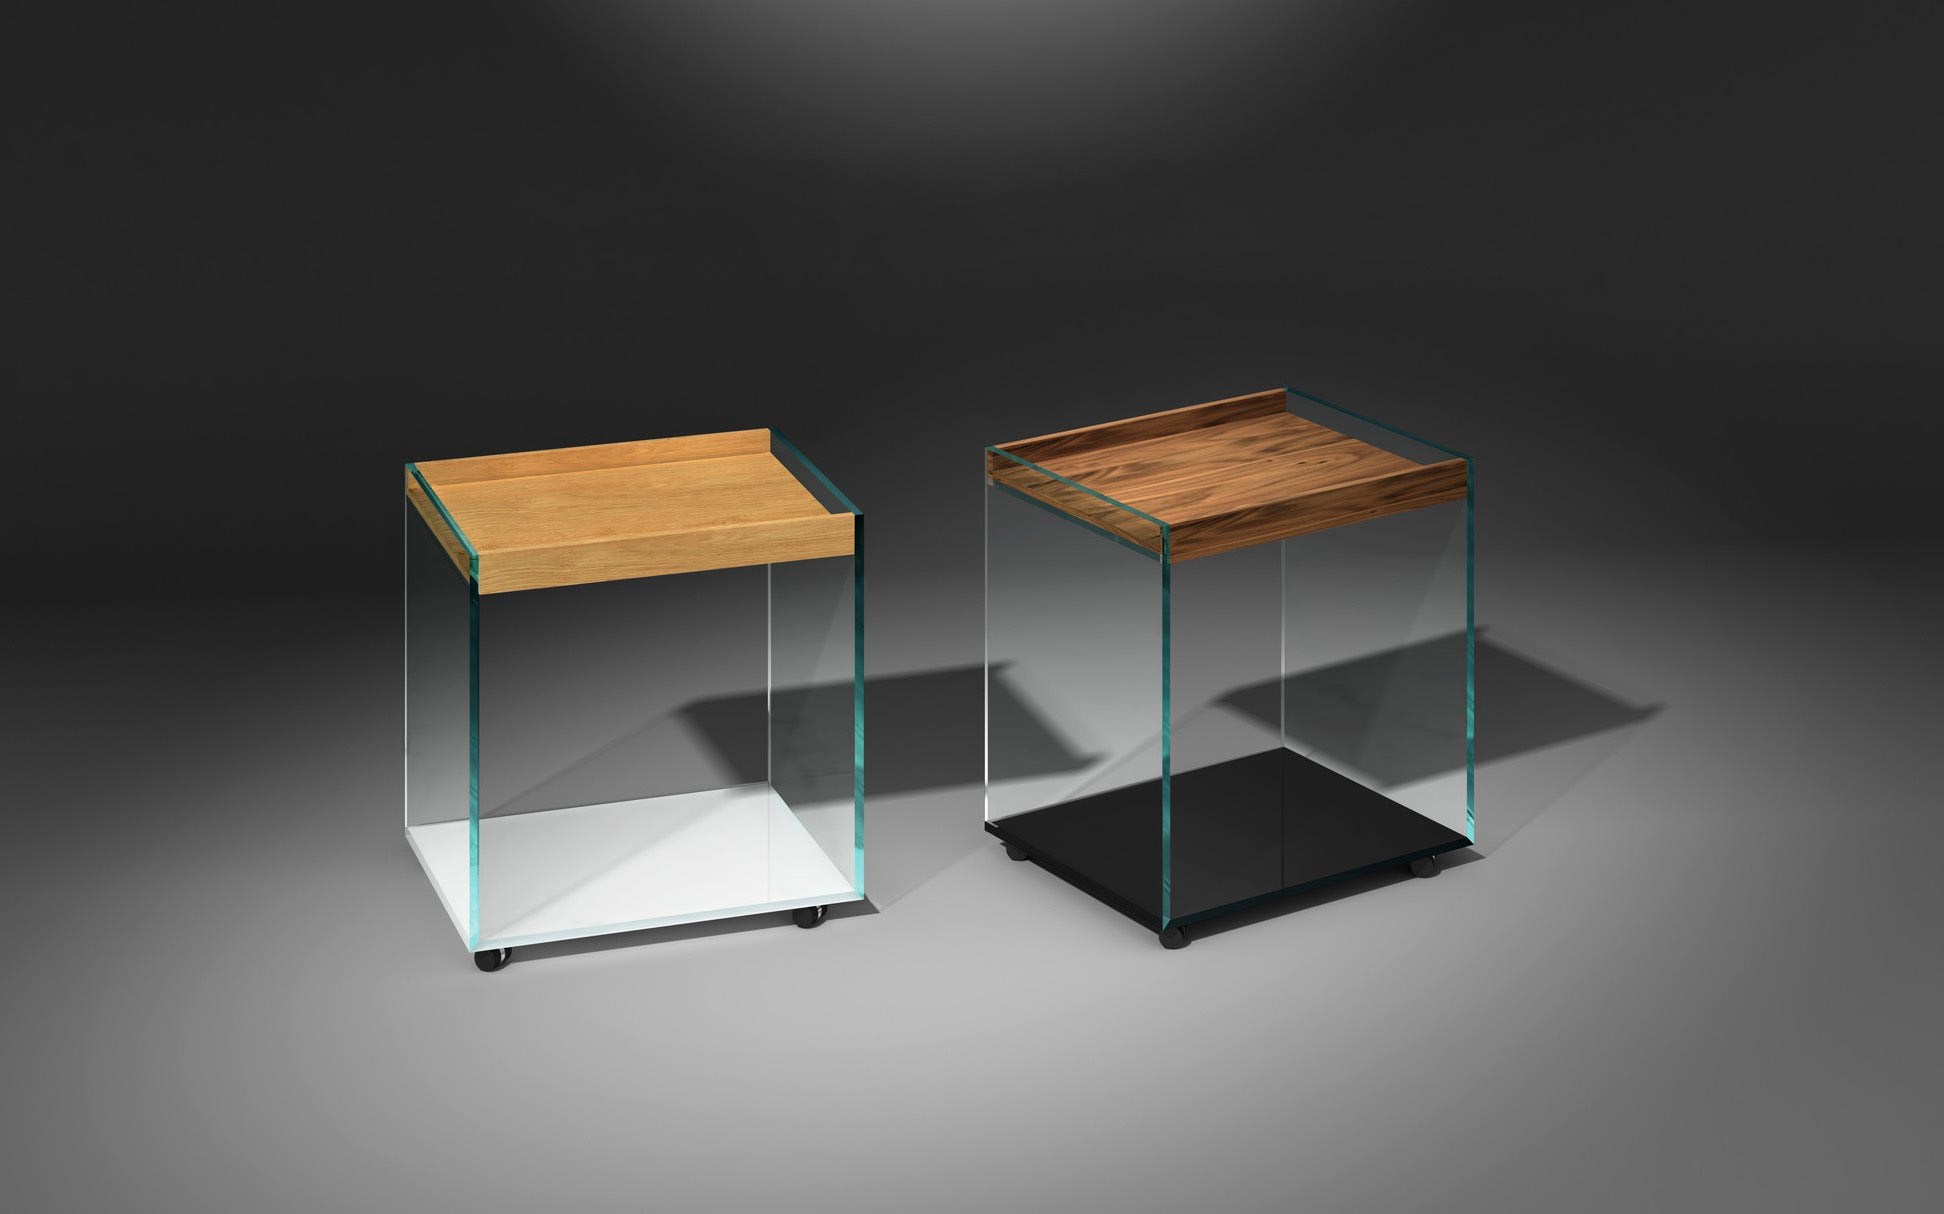 Glass side table with TRAY: 50 OPTWHITE partial pure white - tray OAK + 50 OPTIWHITE partial jet black - tray WALNUT